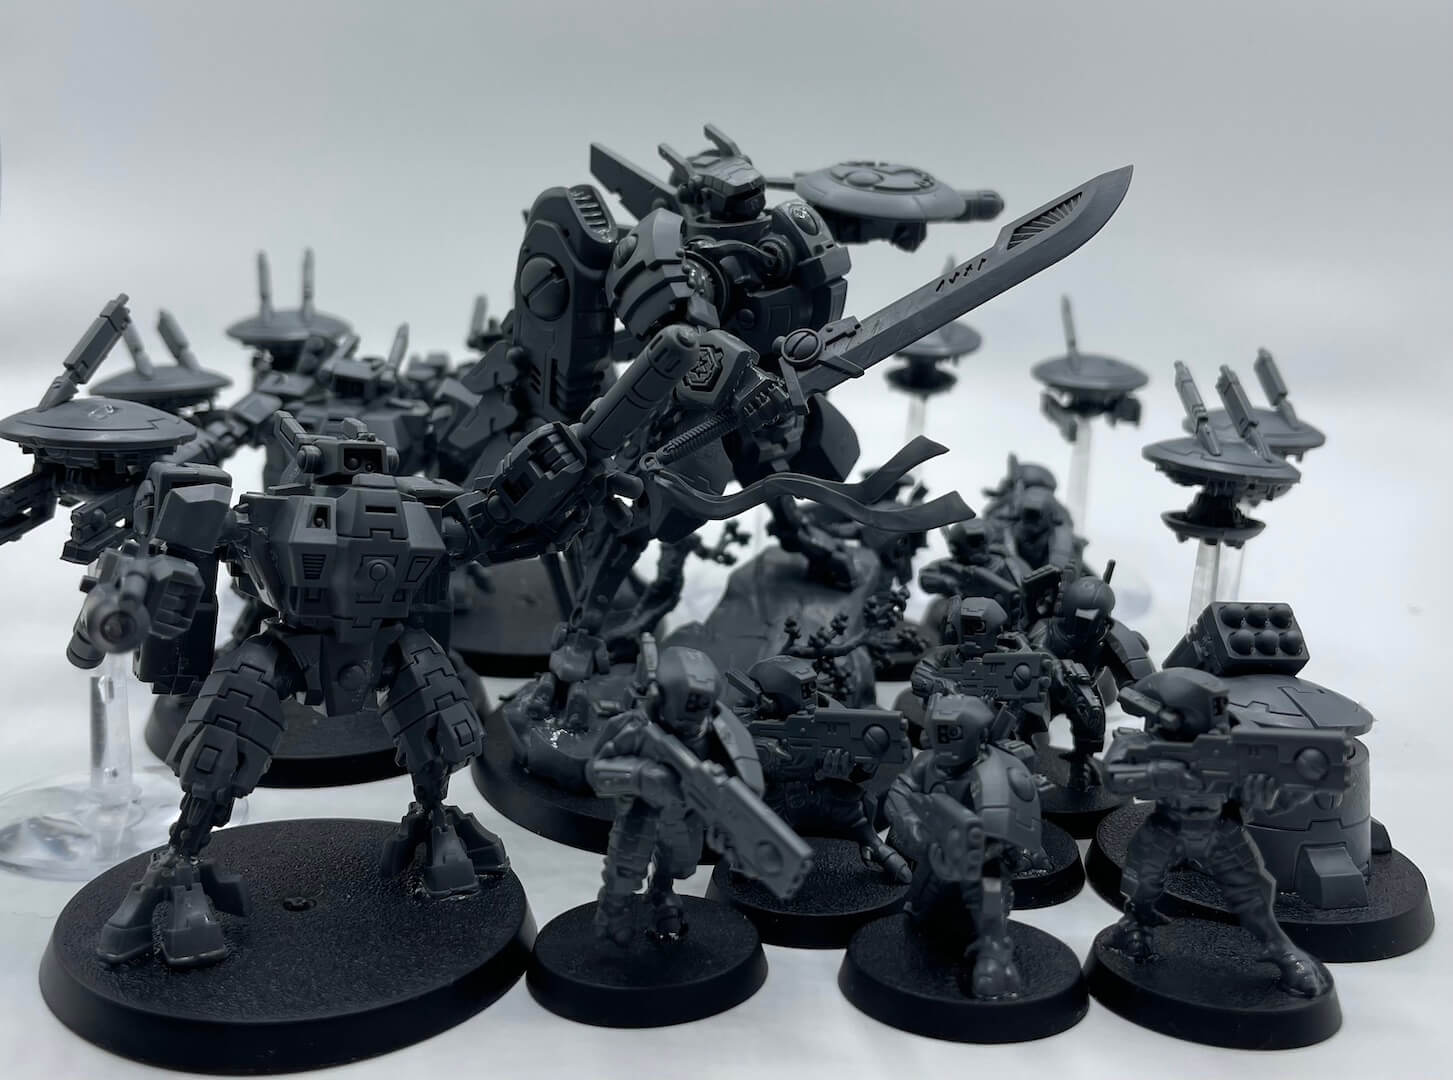 An image of all the units included in the Warhammer 40K Boarding Patrol T'au Empire box set, including mechs and blaster wielding soldiers.